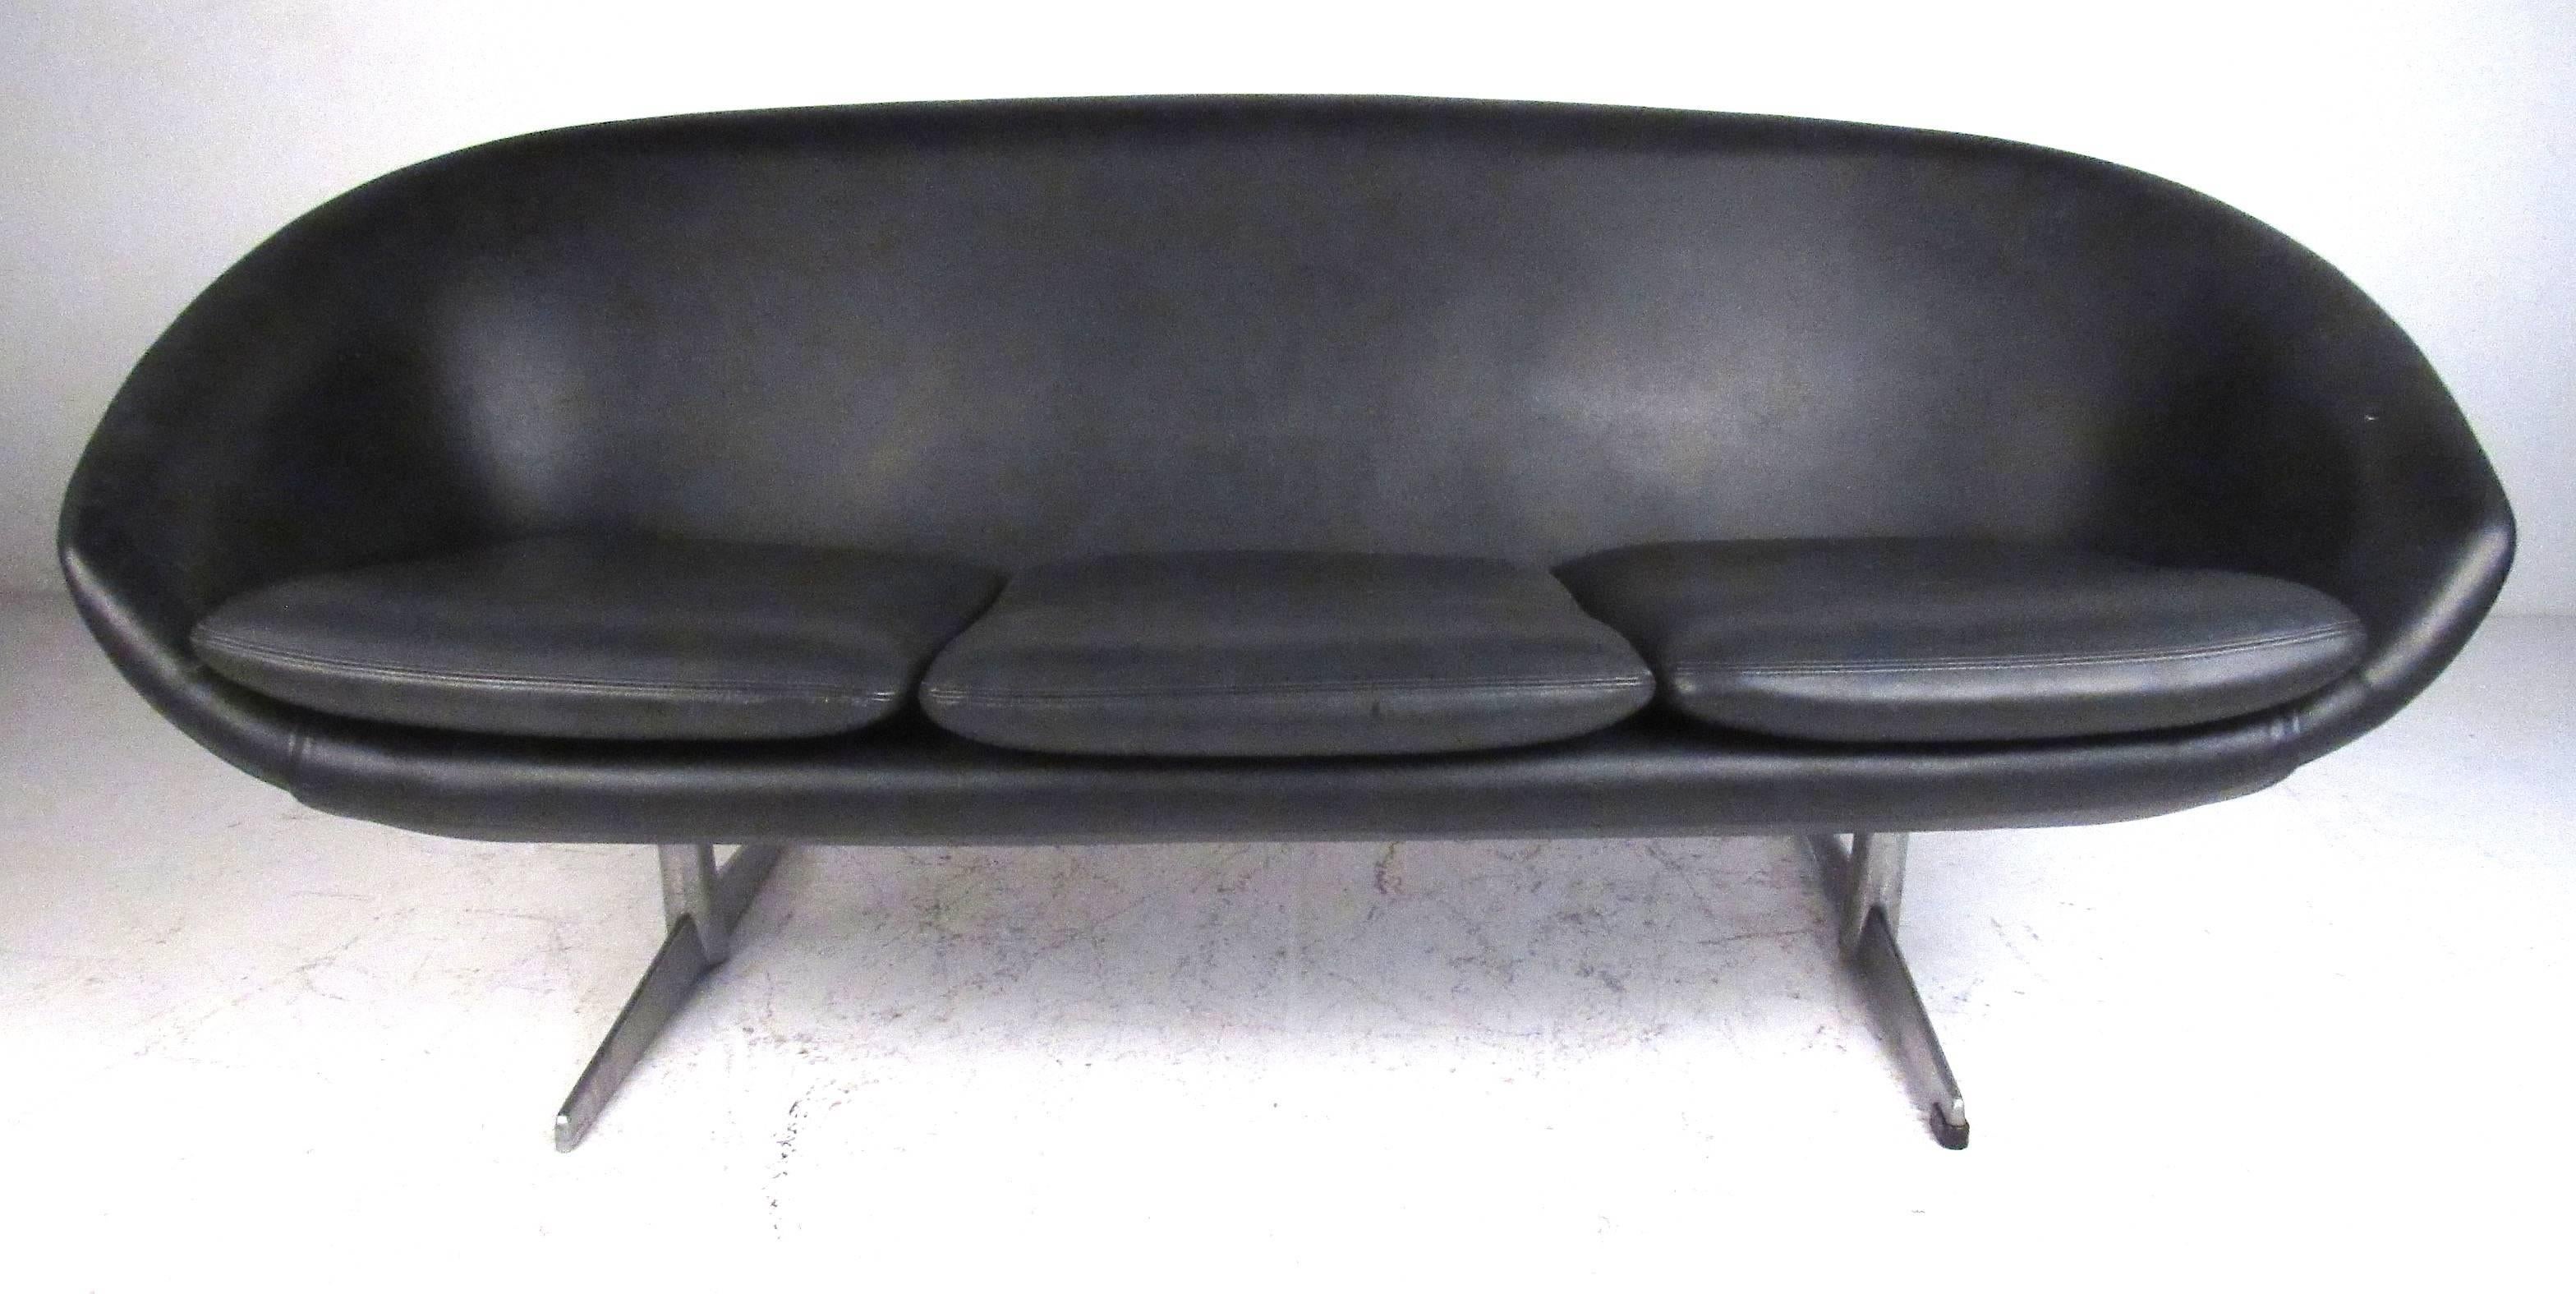 This sculptural molded urethane foam construction sofa is very light weight but durable. Vintage original black vinyl upholstery with brushed aluminium legs, it was manufactured by Swedish producer Overman for their U.S.A. division. Please confirm